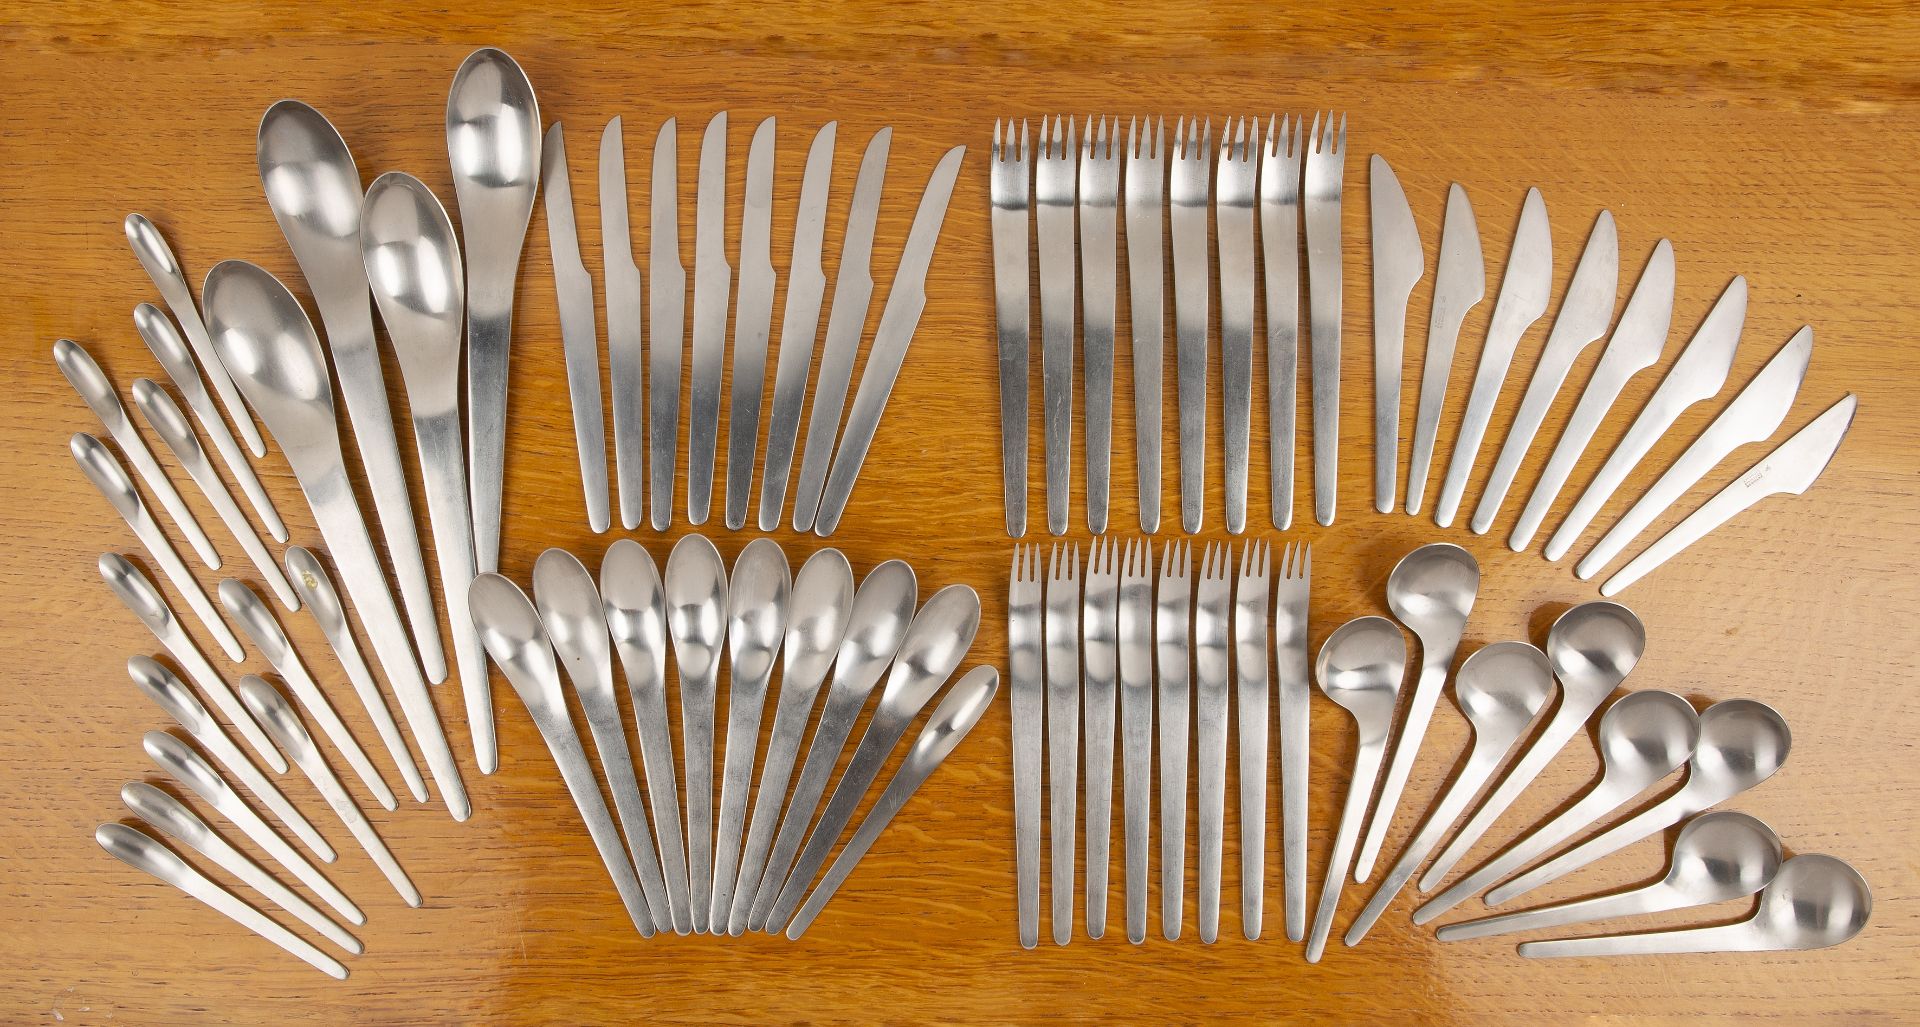 Arne Jacobsen (1902-1971) for Anton Michelsen stainless steel cutlery set, consisting of: four large